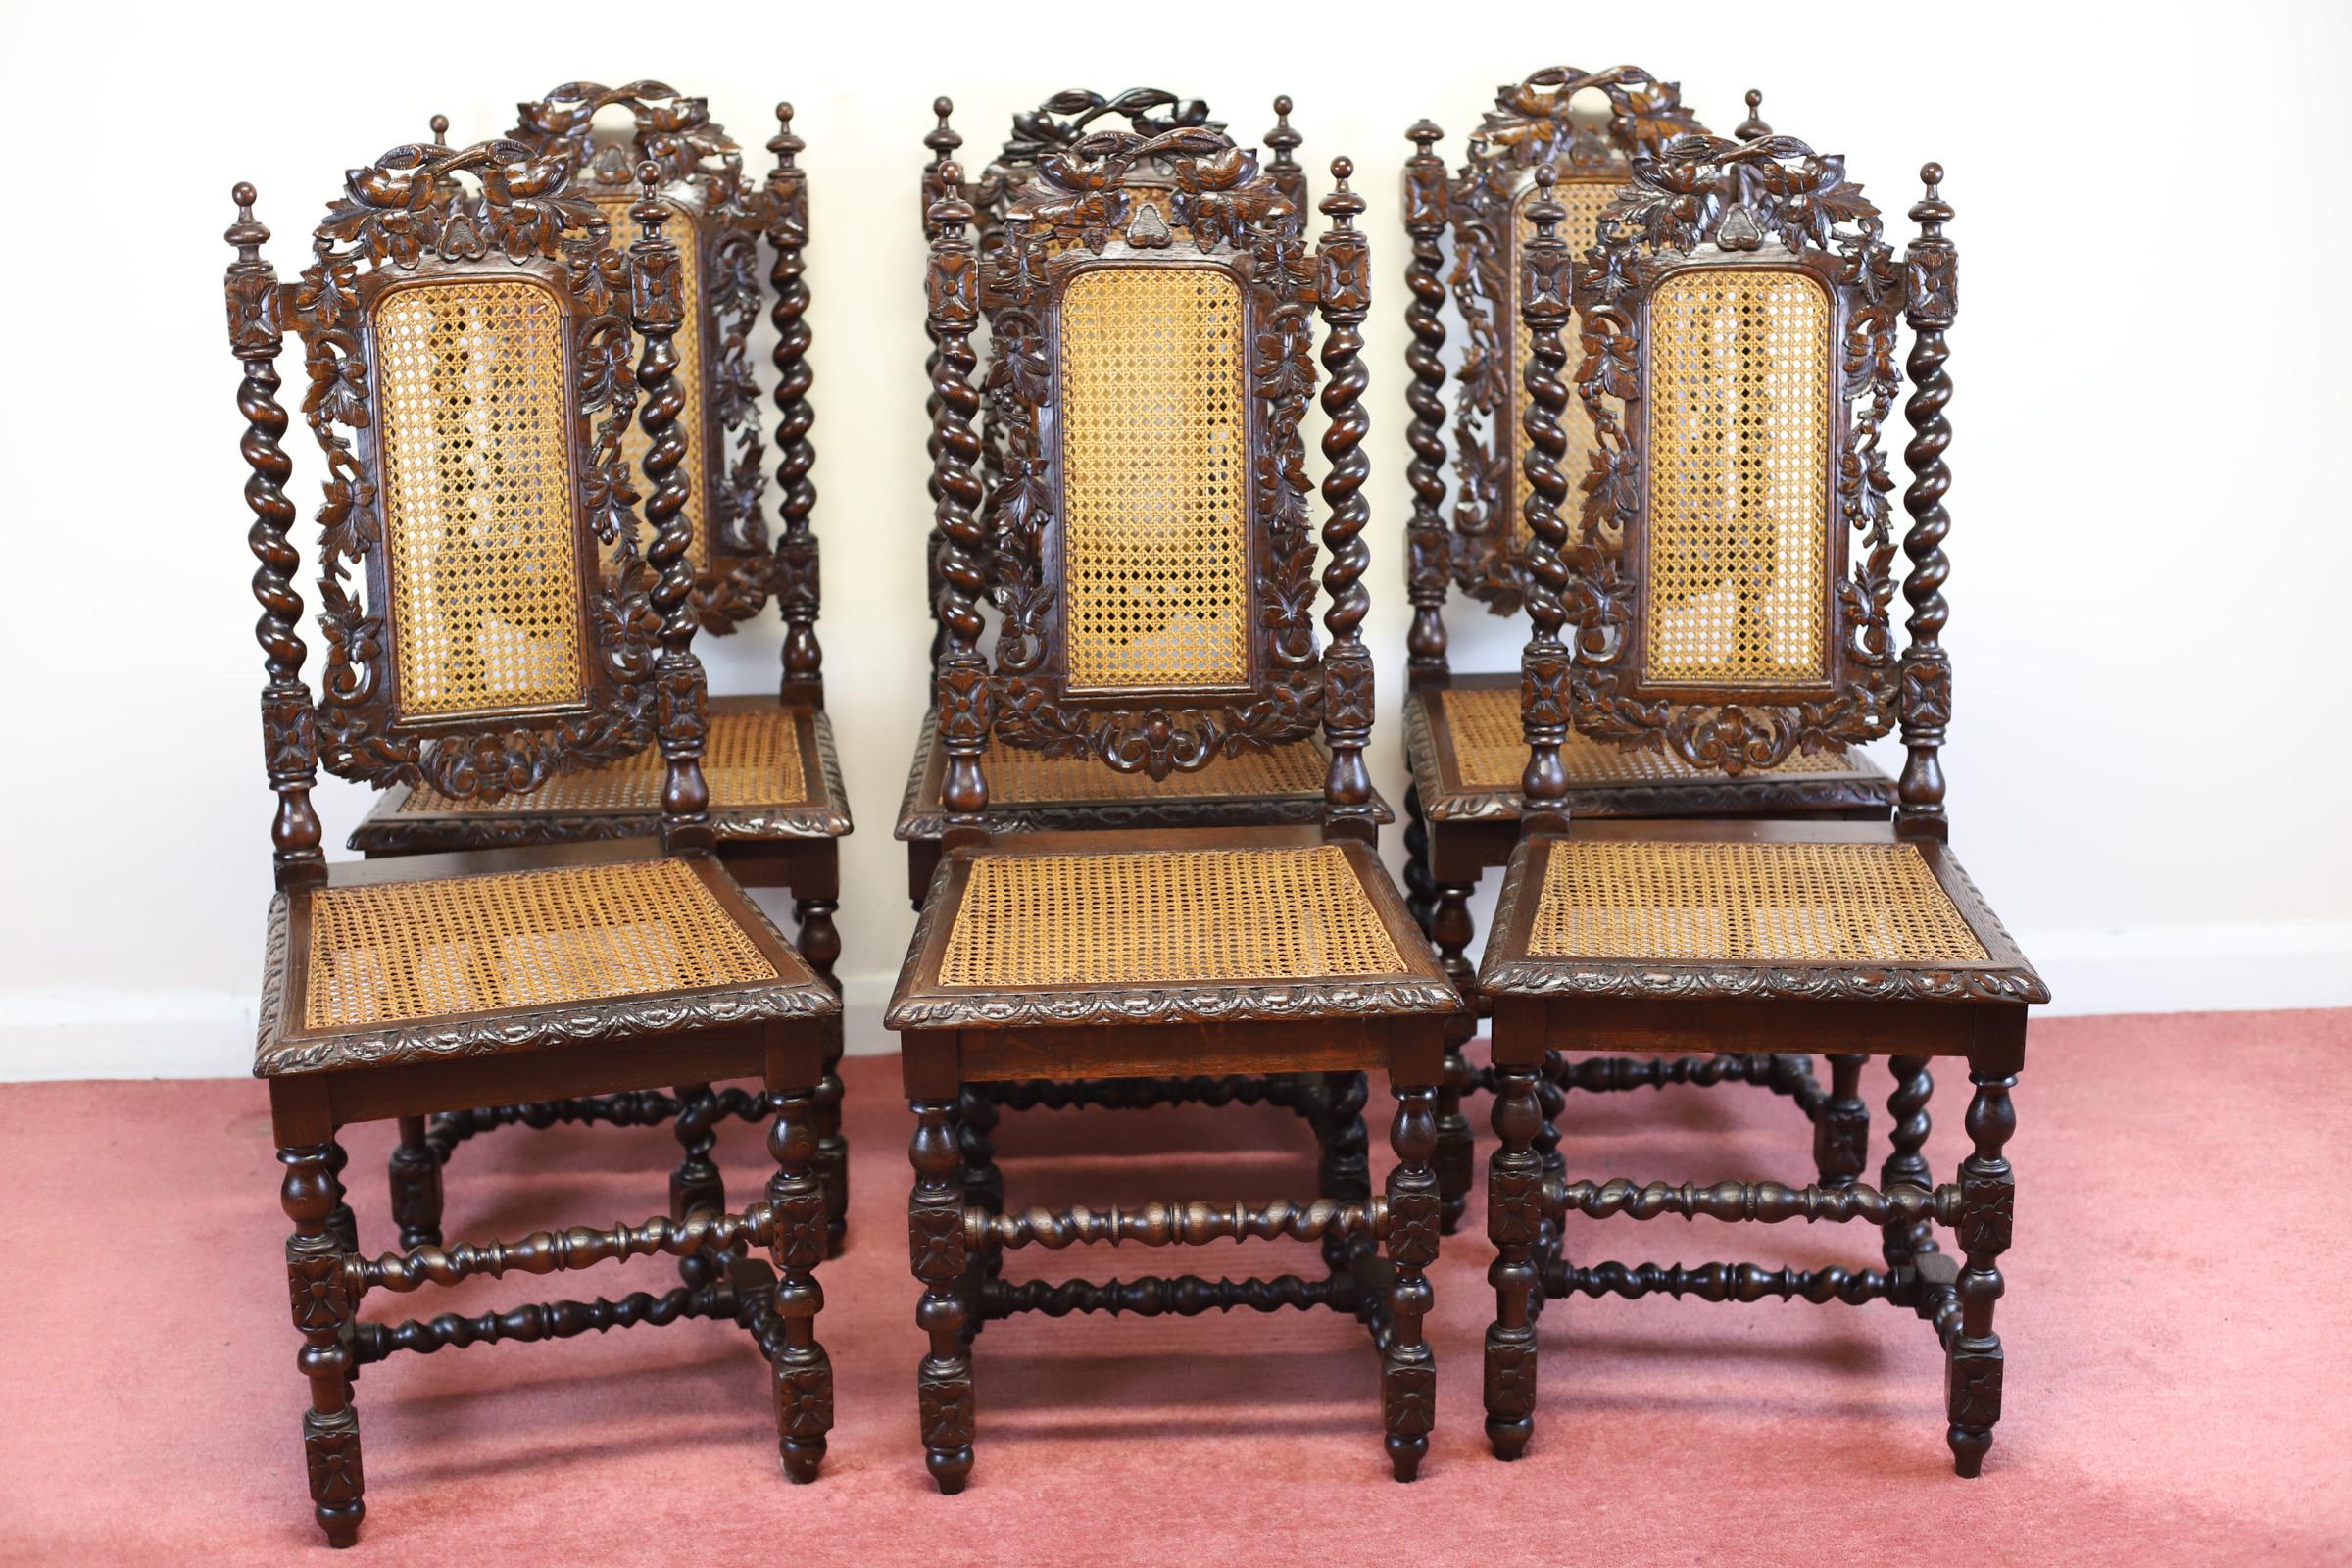 Highly decorative set of six of antique Victorian Jacobean oak dining chairs dating from circa 1870 They have elaborately carved backs with carved and pierced central panels and a carved back rail depicting vine leaves. The side supports are barley